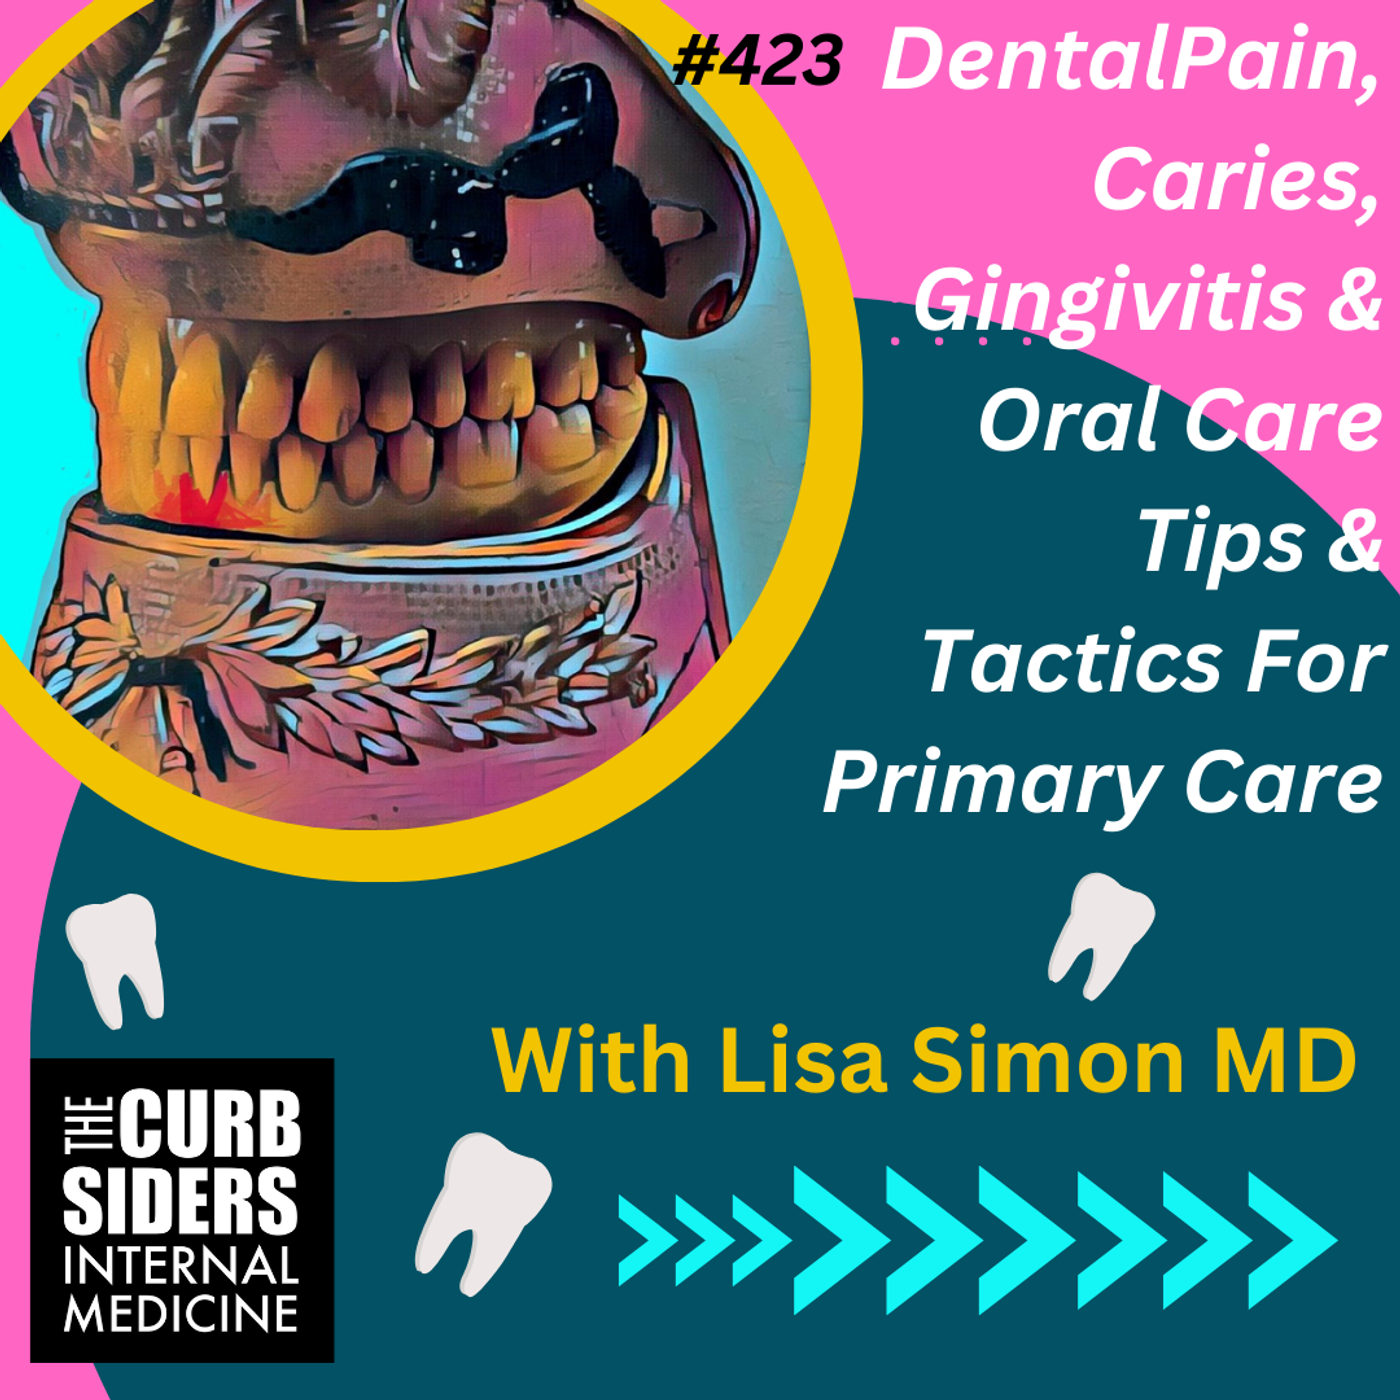 #423 Dental Pain, Caries, Gingivitis, and Oral Care Tips & Tactics for Primary Care With Dr Lisa Simon